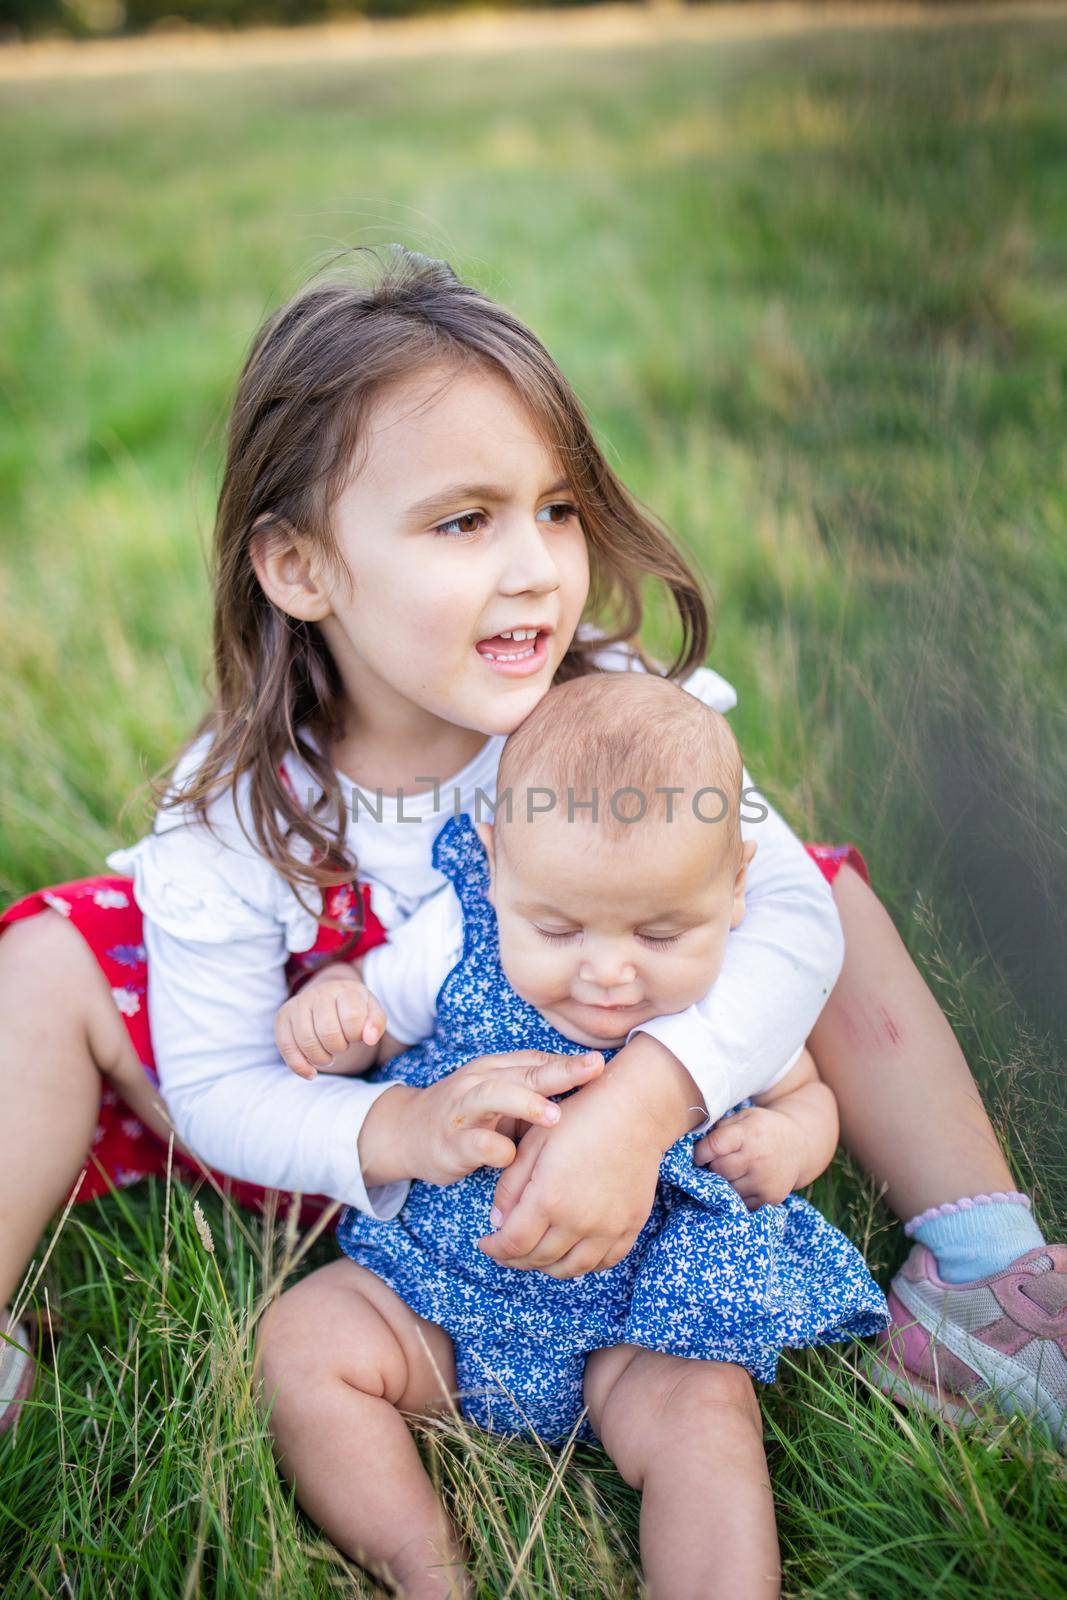 Adorable little girl sitting on grass and lovingly hugging baby. Portrait of cute young child sitting with her baby sibling in park. Young family playing outdoors